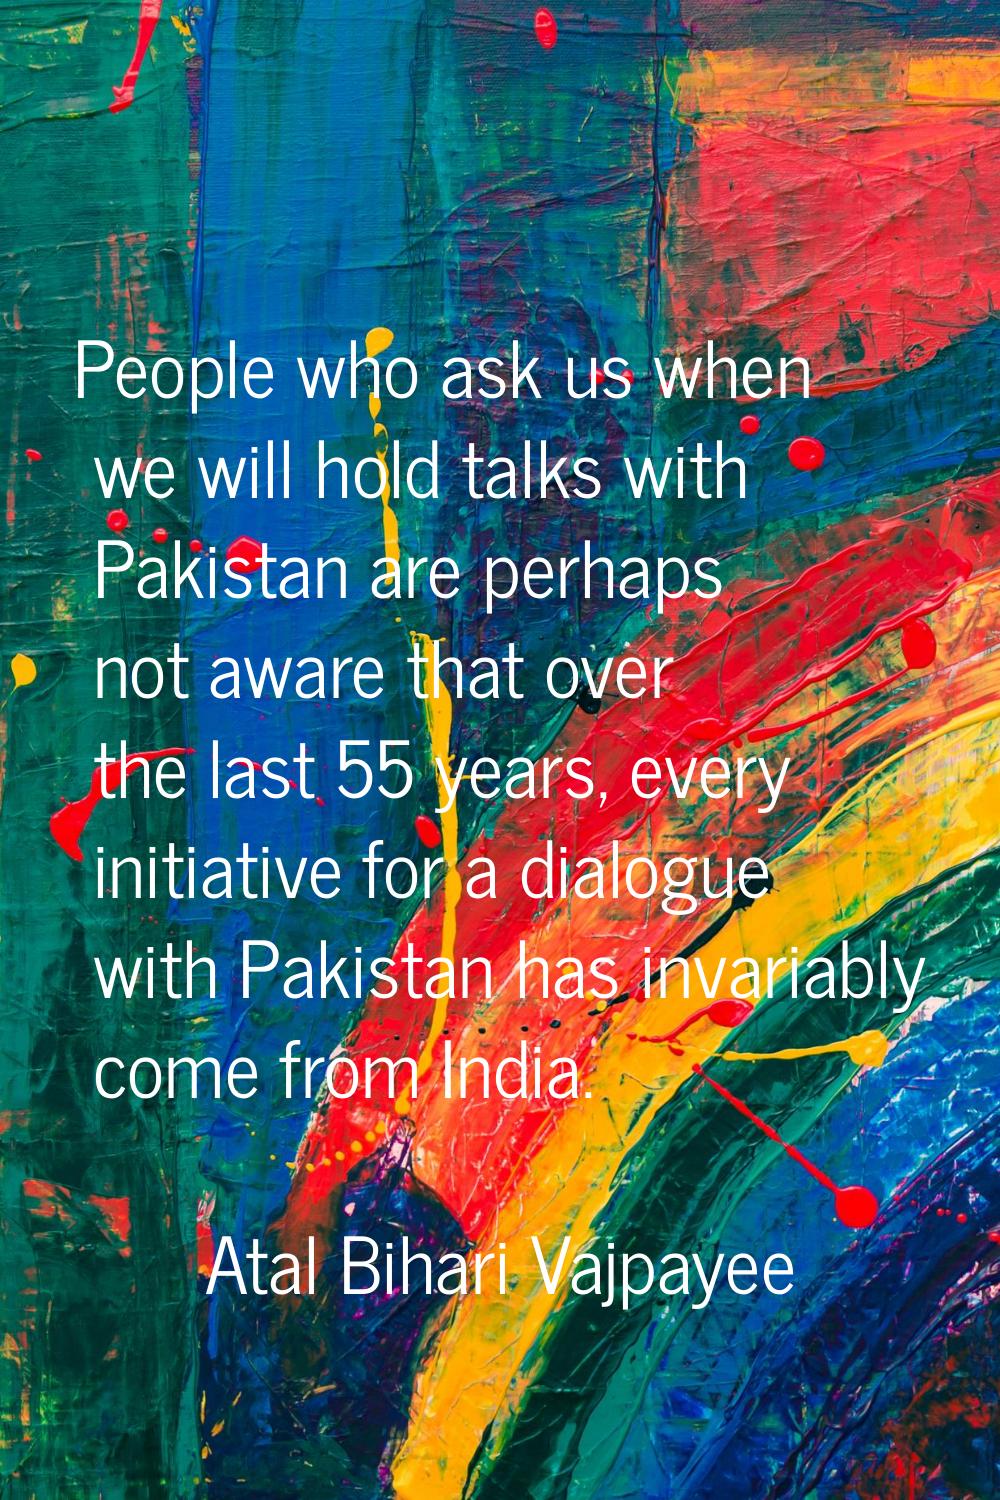 People who ask us when we will hold talks with Pakistan are perhaps not aware that over the last 55